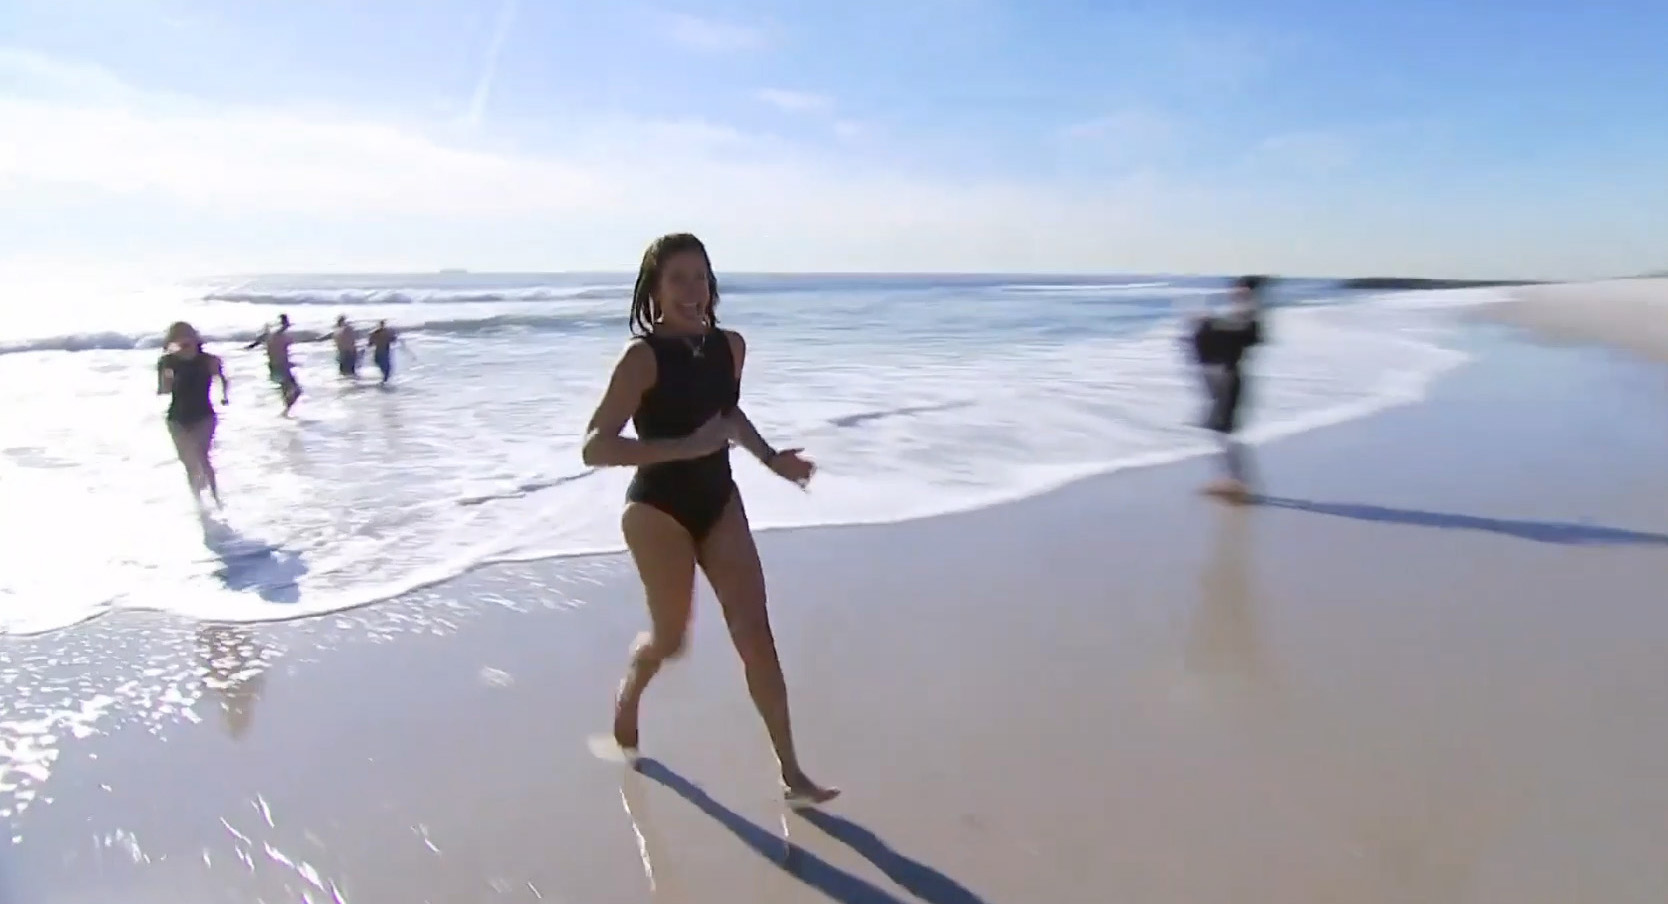 Last year, Hoda and Jenna wore tiny black swimsuits again when they did the Polar Bear Plunge